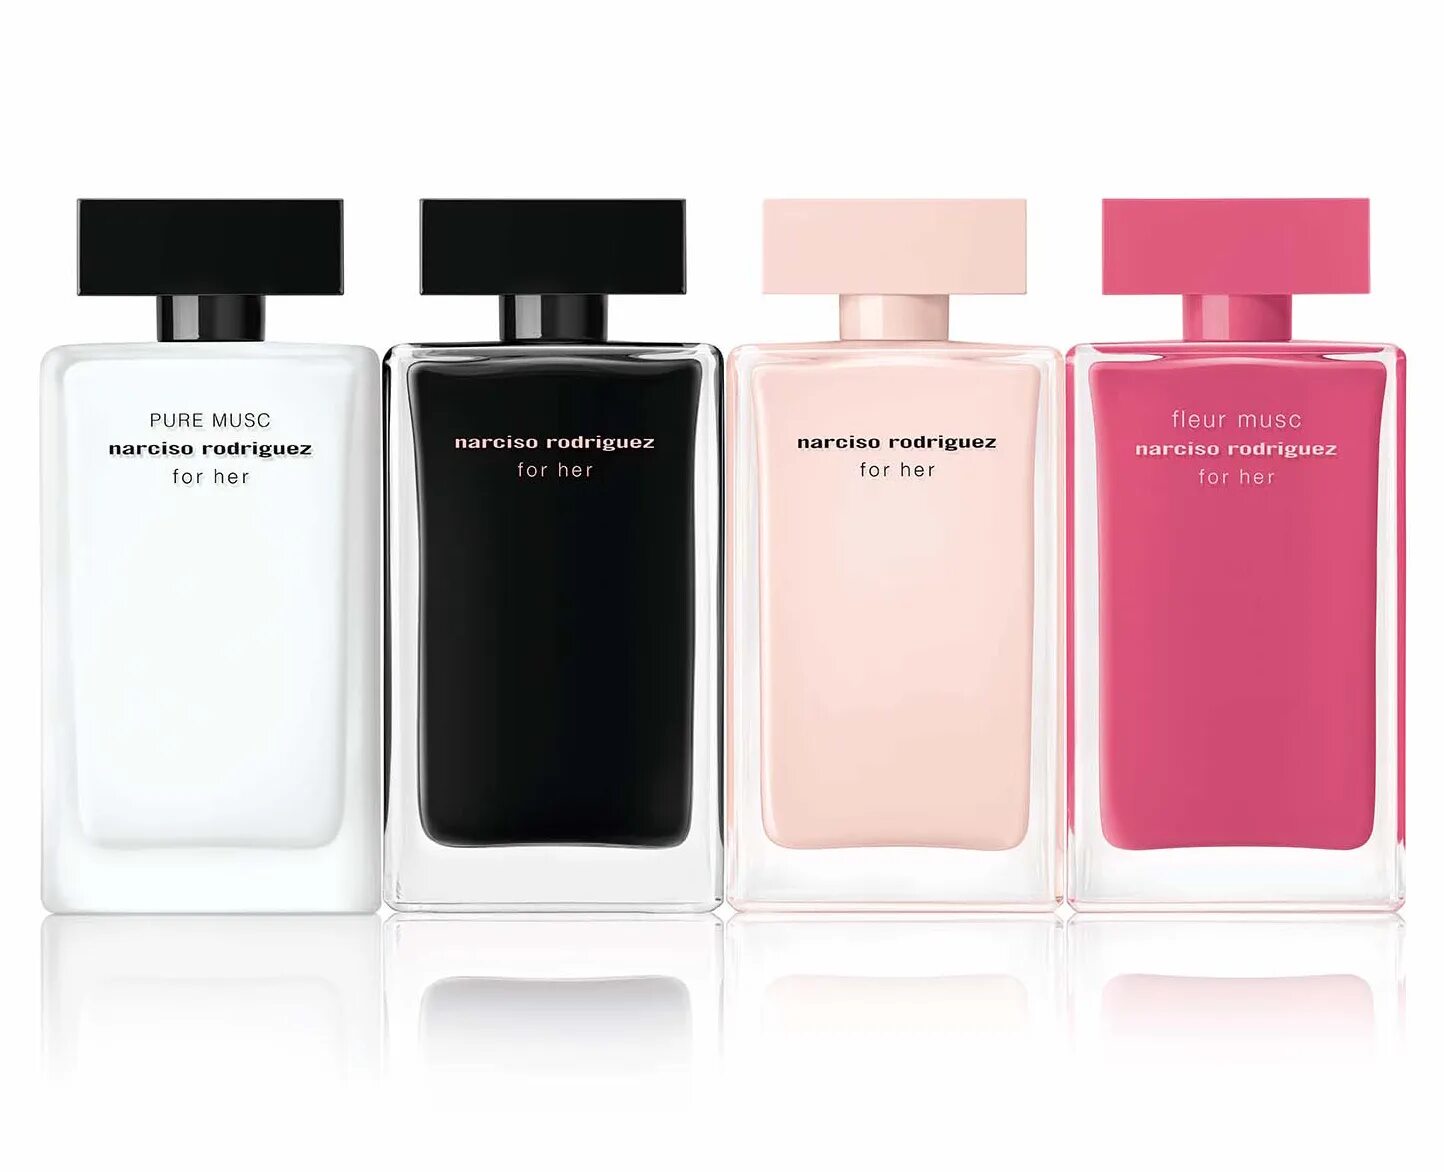 Narciso Rodriguez Pure Musk. Ароматы нарциссо Родригес. Narciso Rodriguez Narciso. Narciso Rodriguez for her Eau de Toilette 30ml. Нарциссо родригес женский парфюм